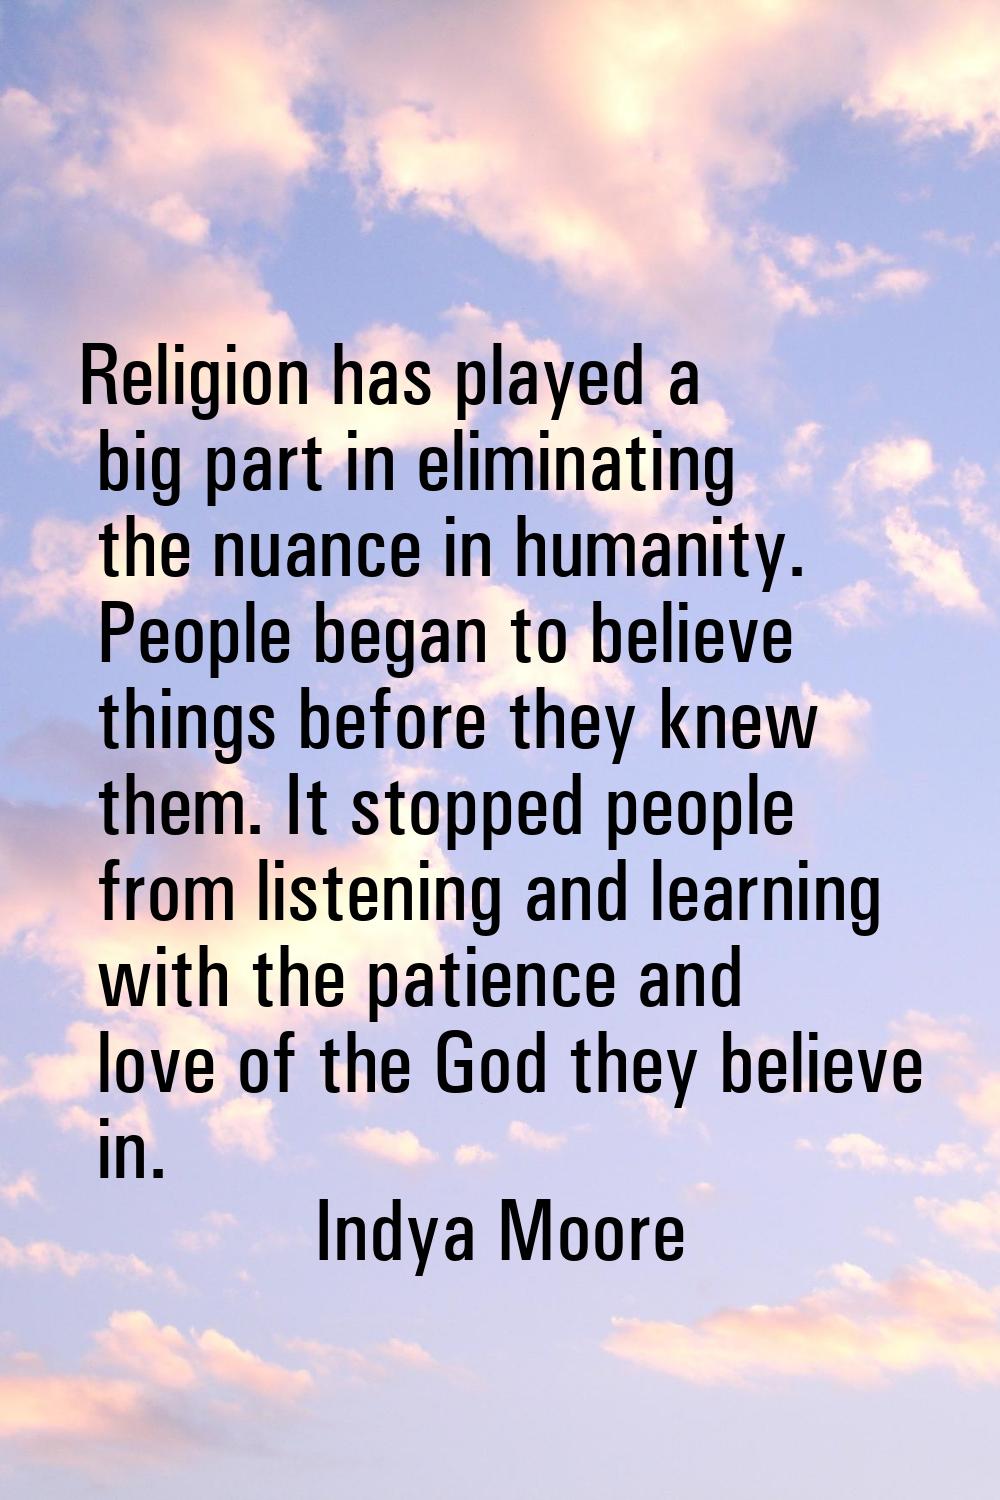 Religion has played a big part in eliminating the nuance in humanity. People began to believe thing